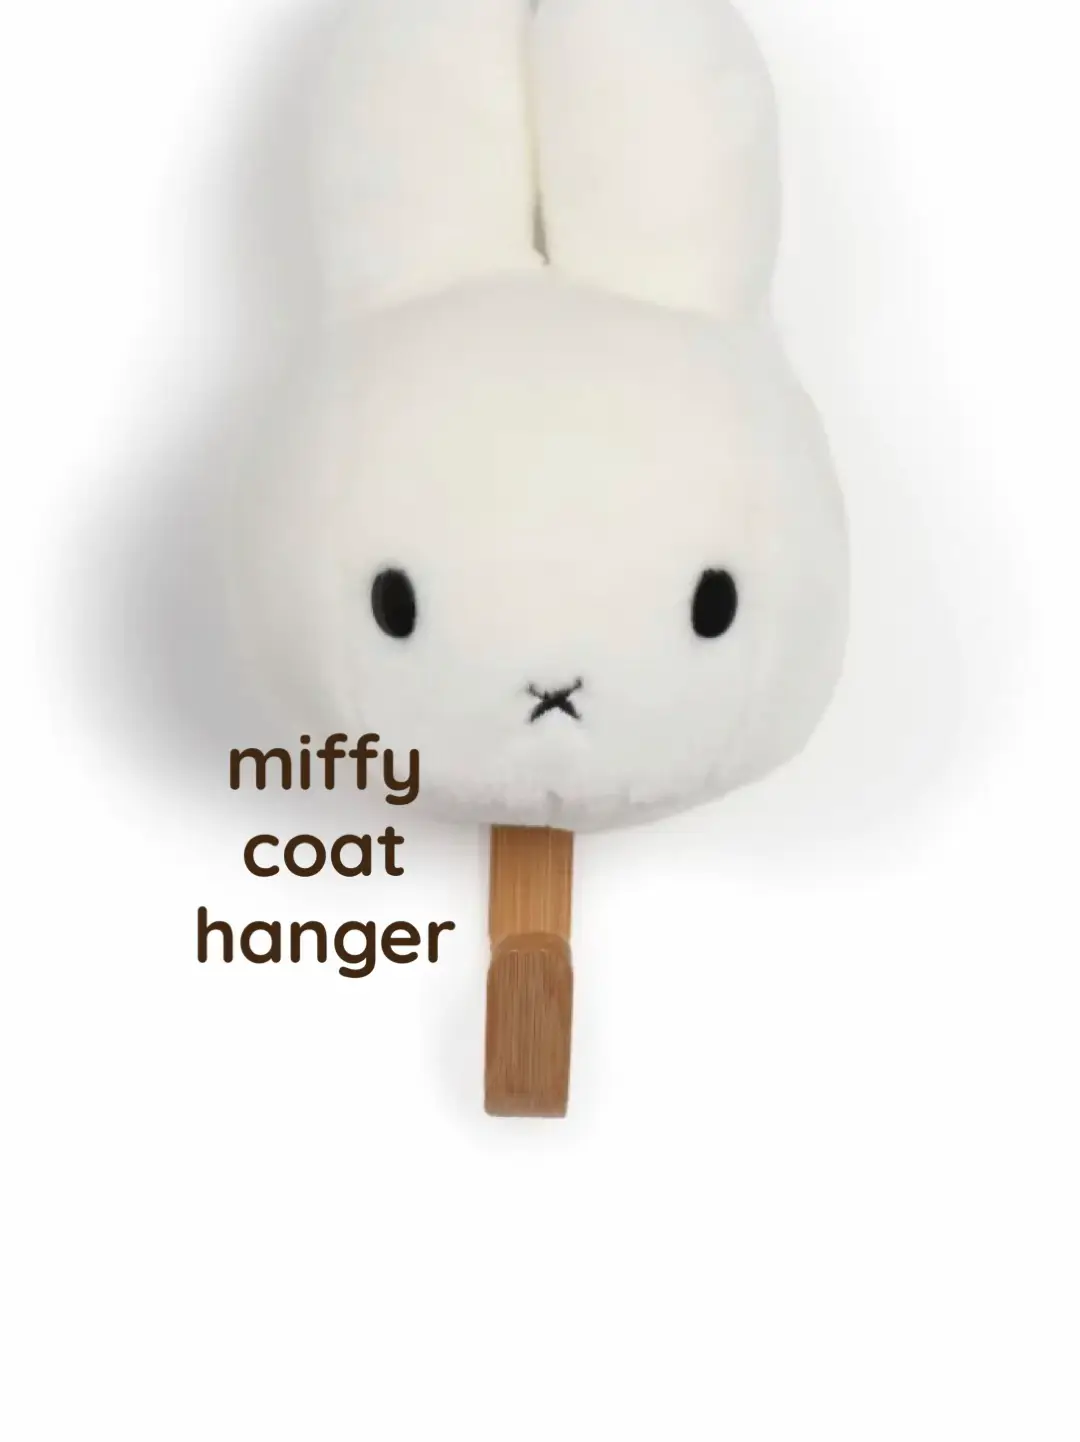 Miffy Plushies for Babies - Lemon8 Search